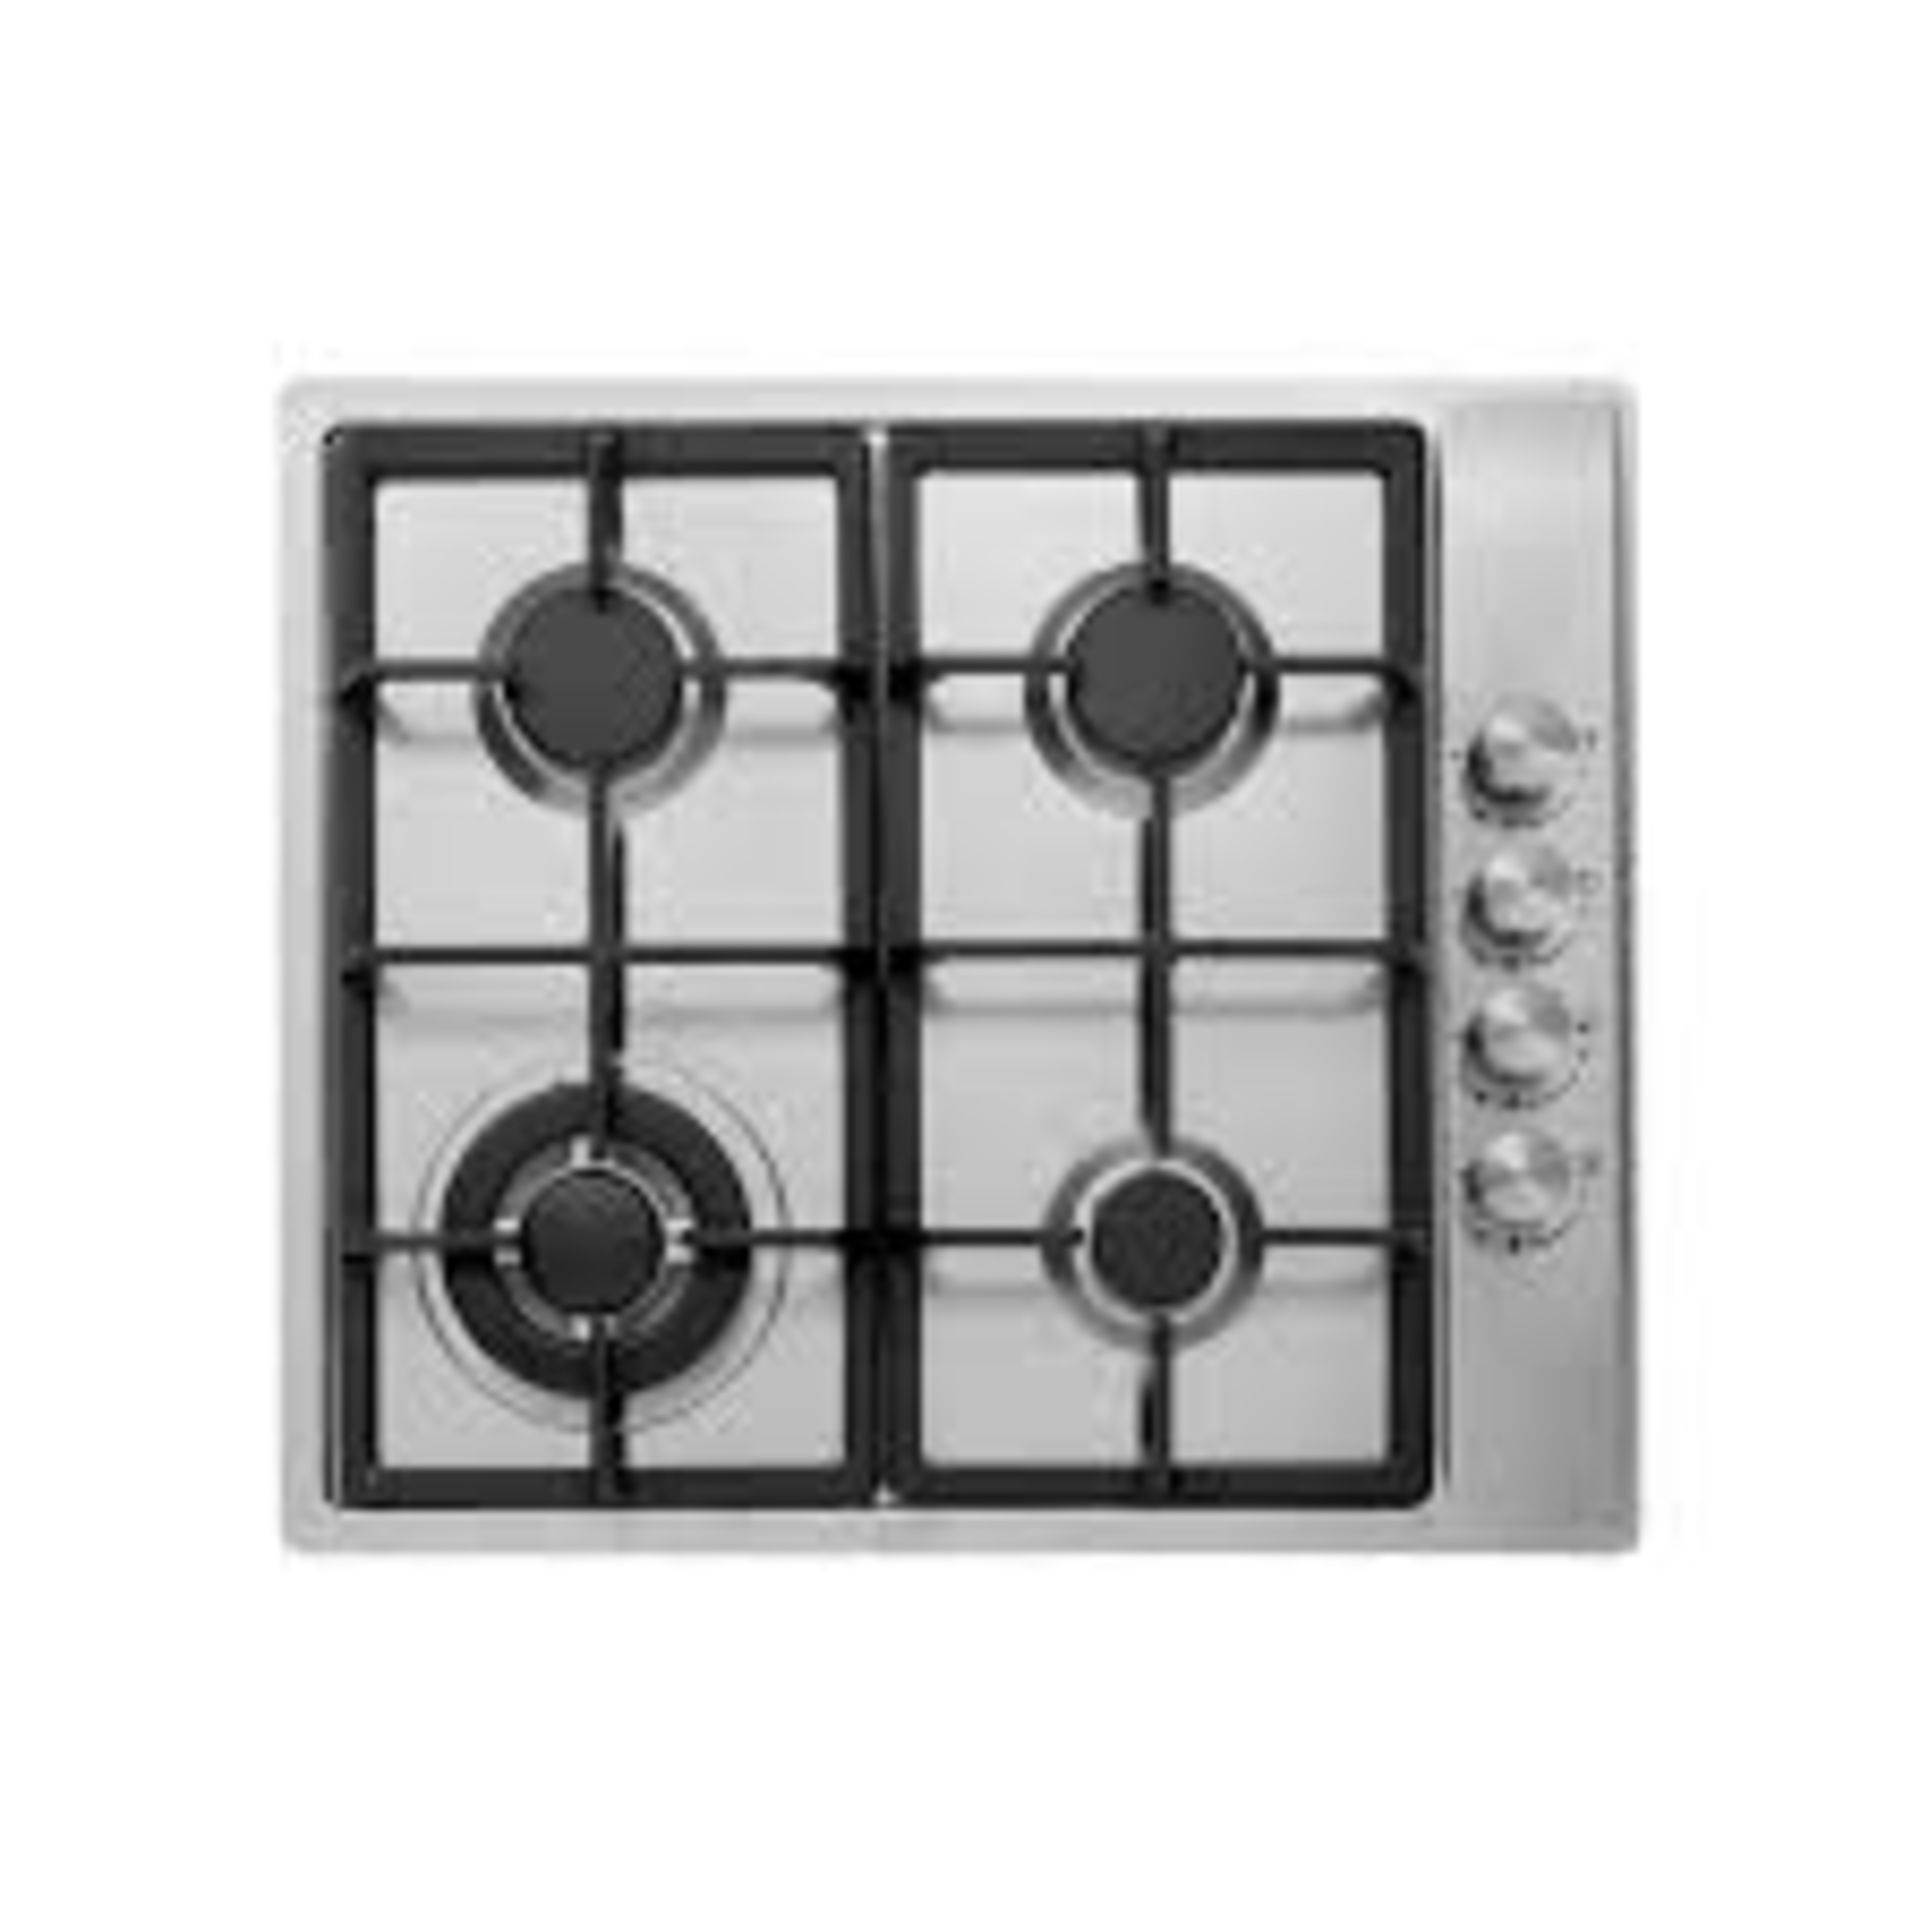 Boxed UBGHDFFJ60S Stainless Steel 4 Burner Gas Hob (Public Viewing and Appraisals Available)